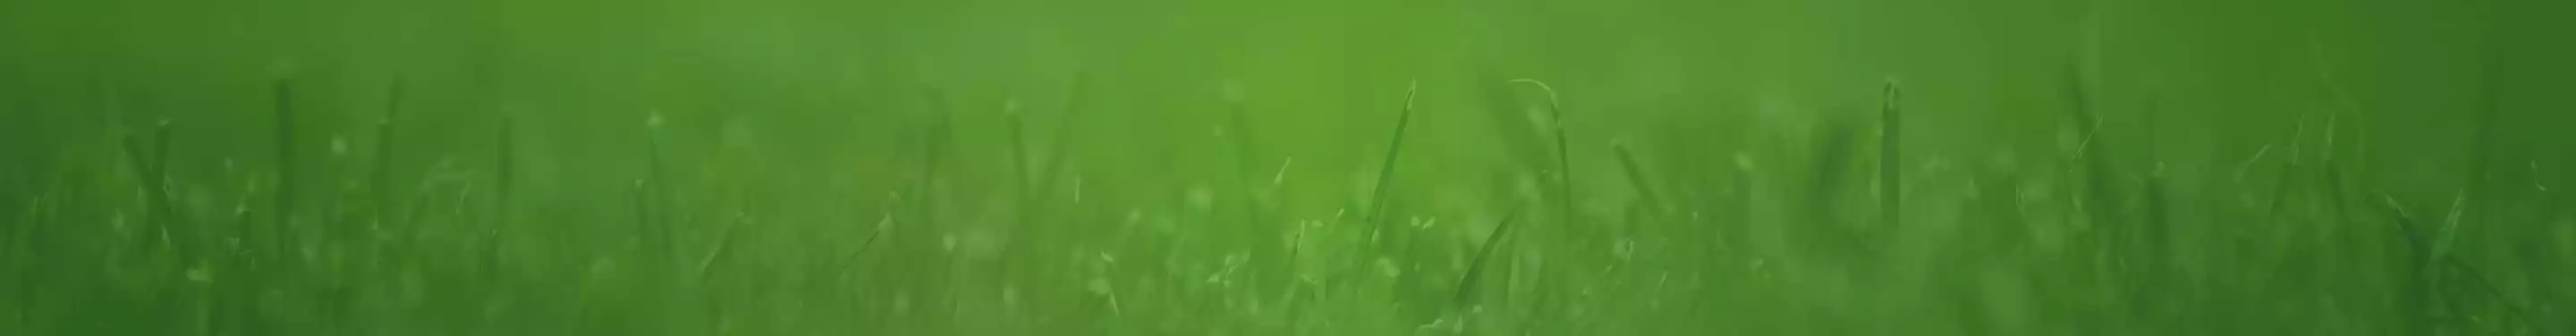 Close-up of grass against green background.